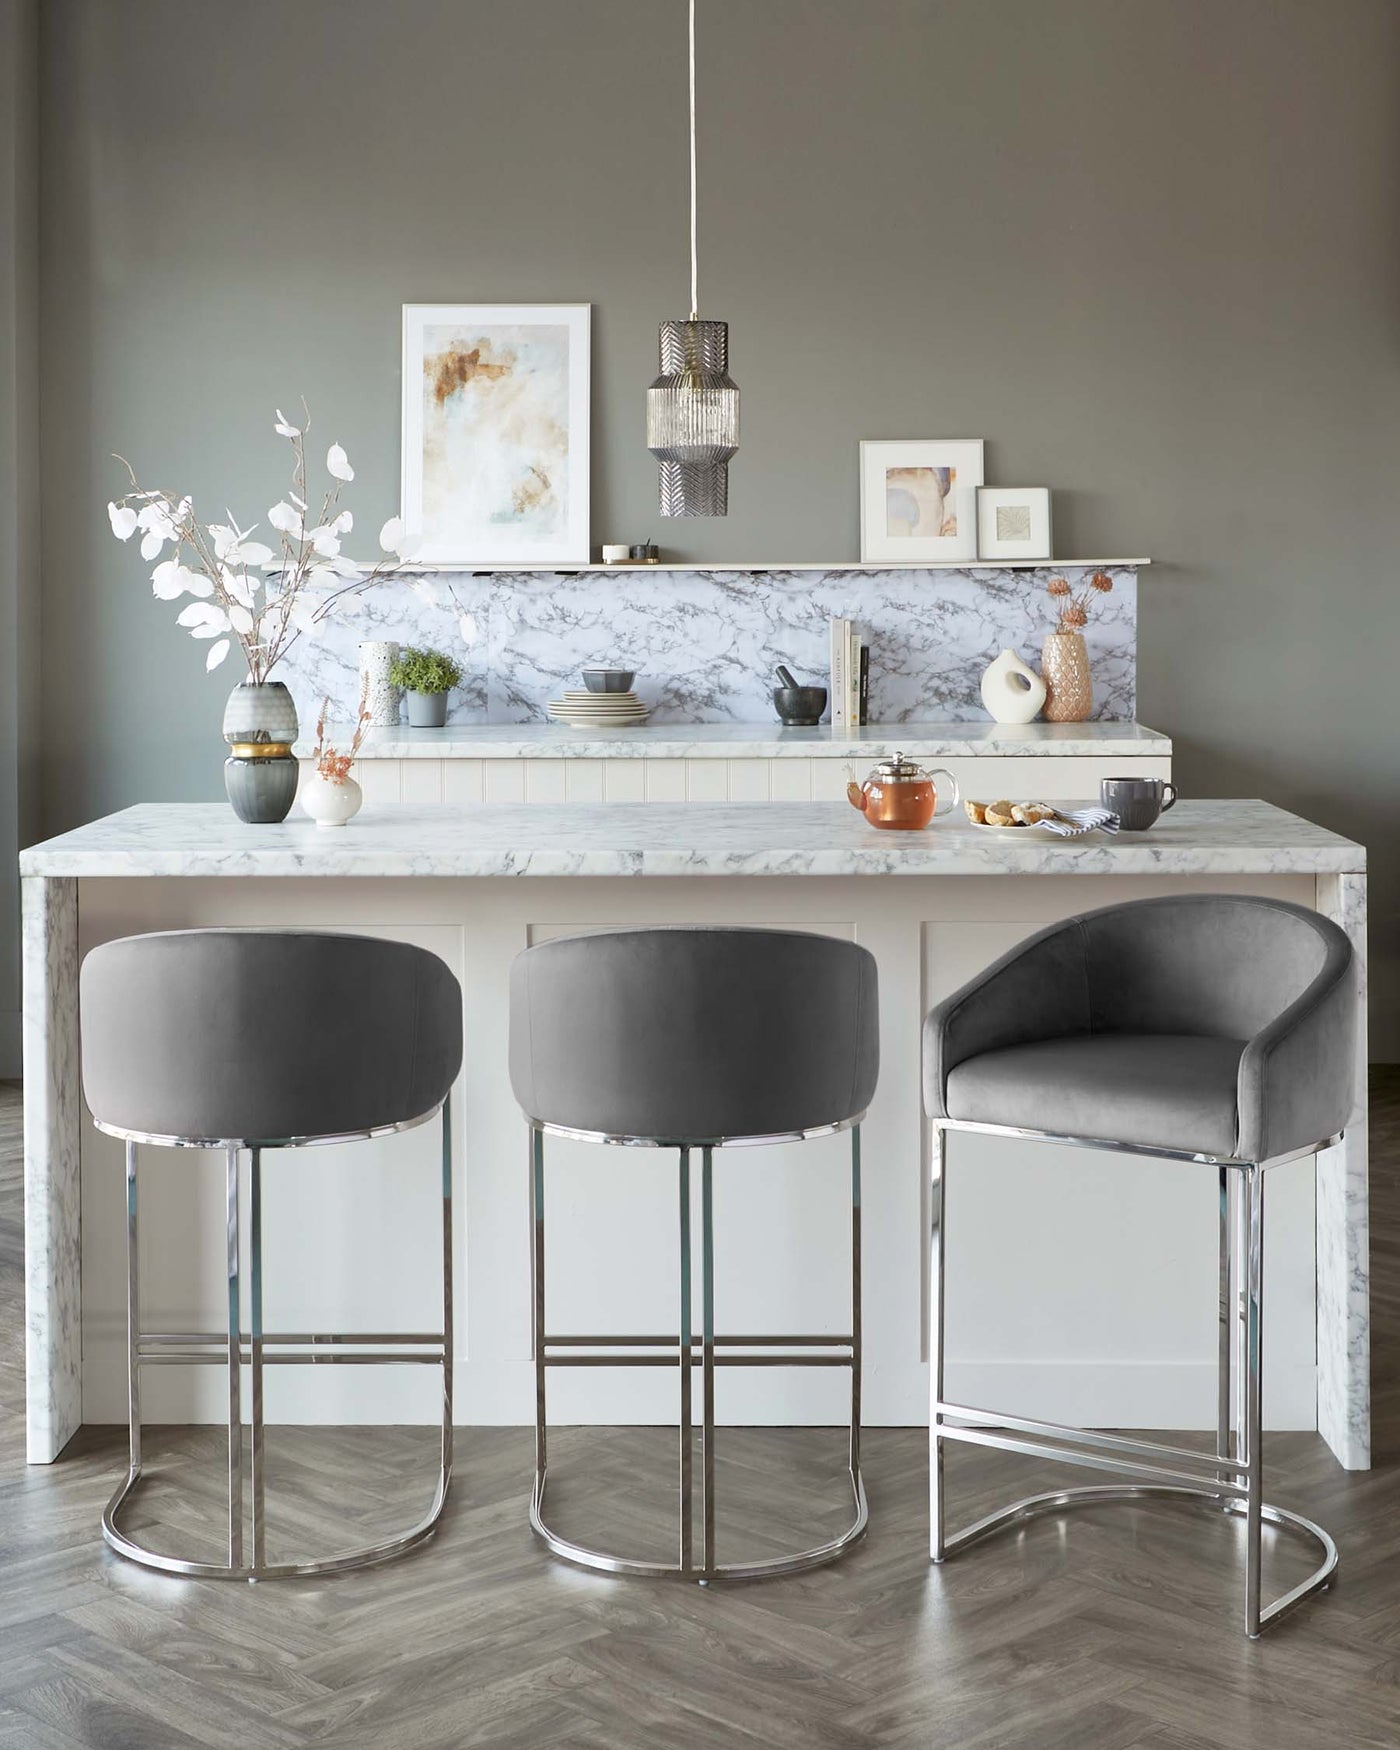 Two modern grey upholstered bar stools with sleek chrome bases in front of a marble kitchen counter.